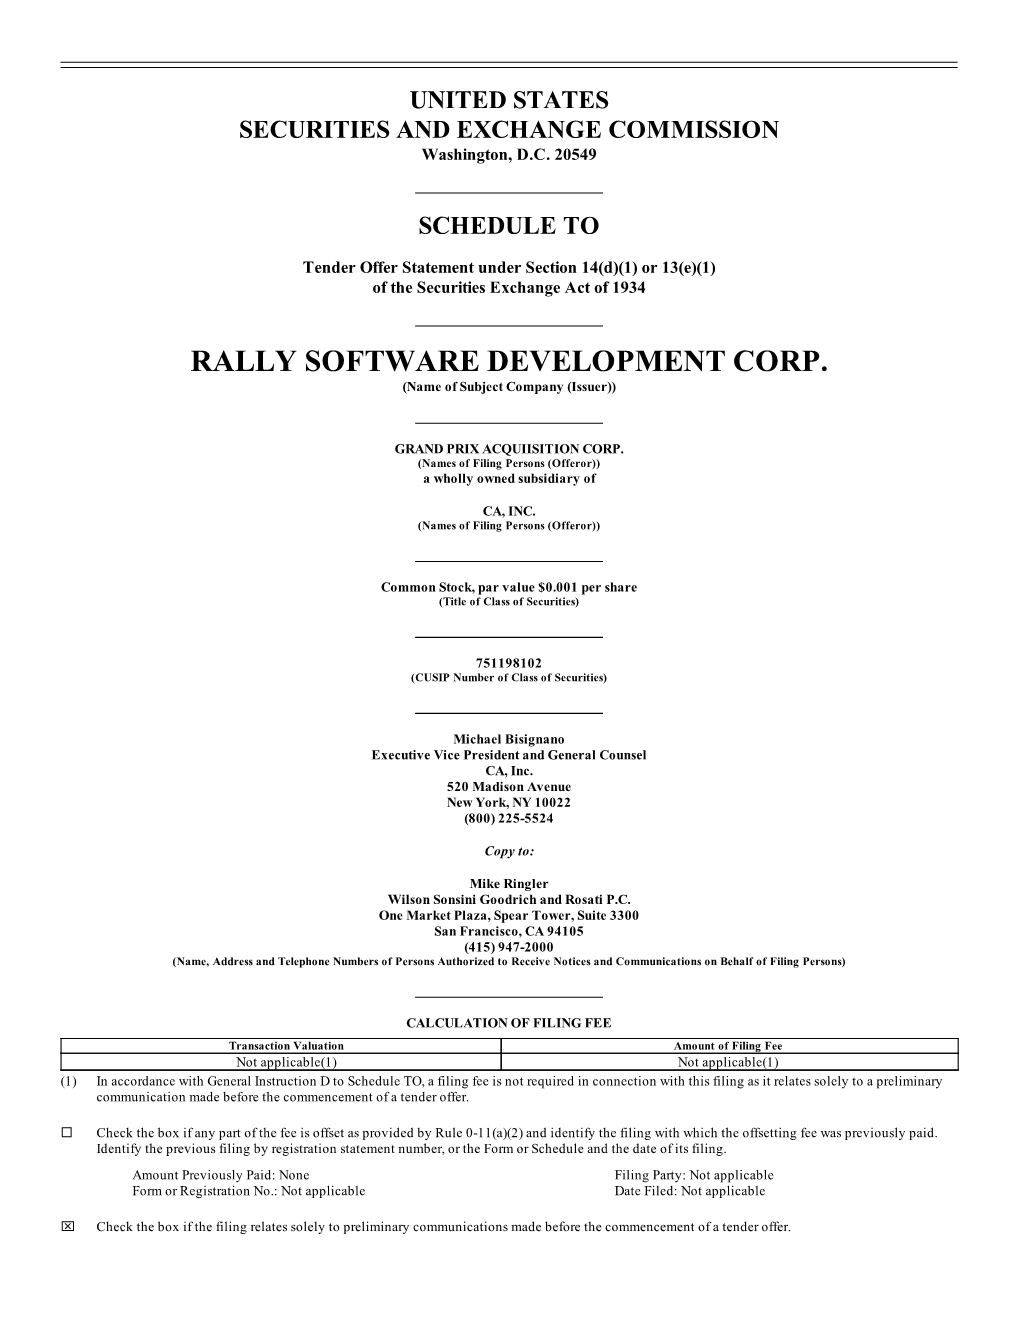 RALLY SOFTWARE DEVELOPMENT CORP. (Name of Subject Company (Issuer))